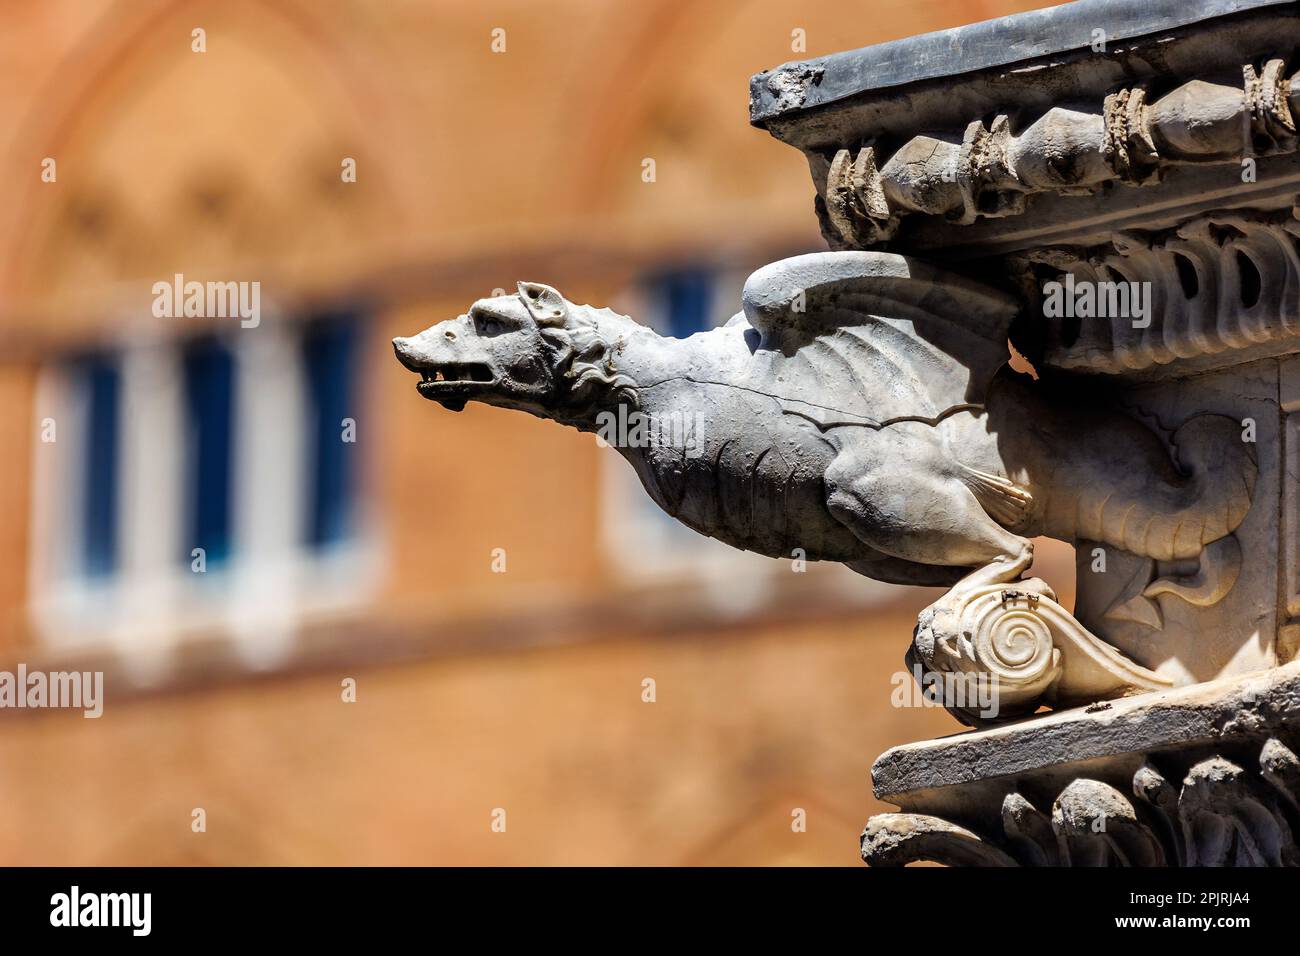 Details from Siena Stock Photo